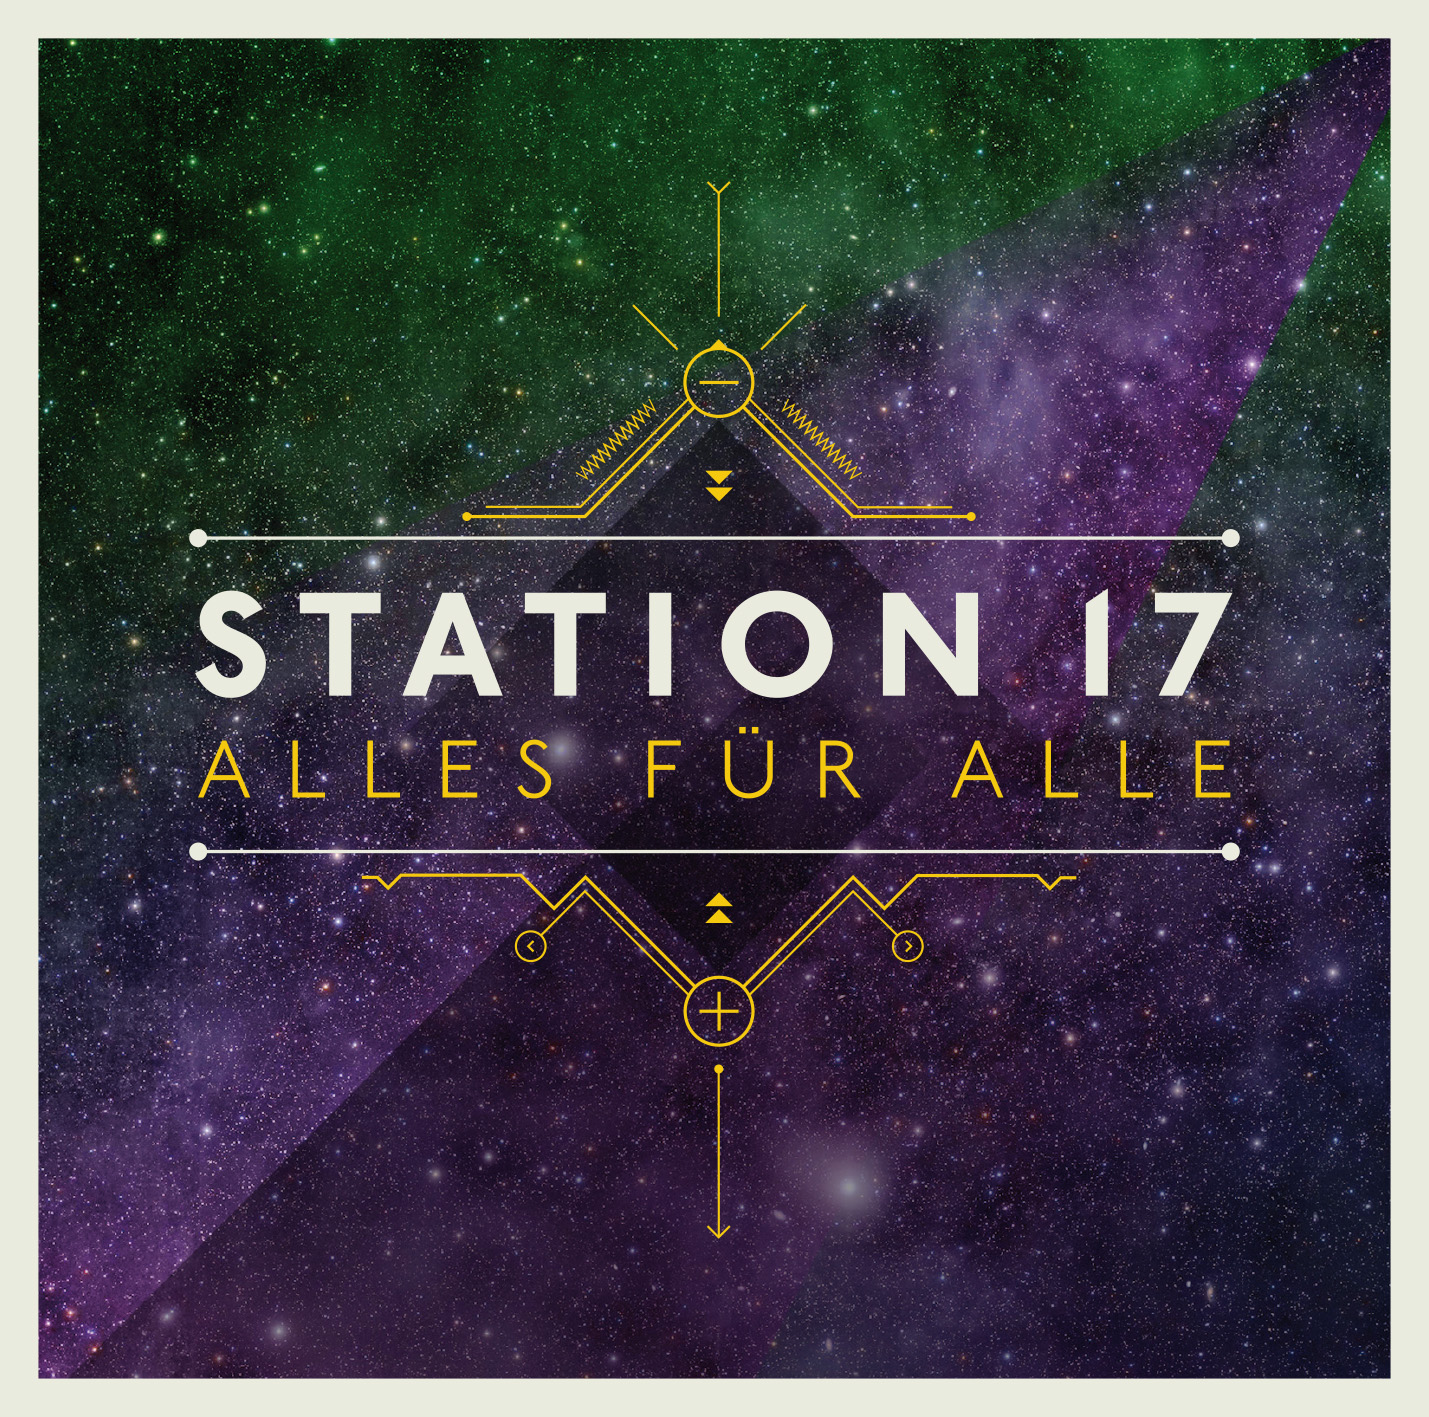 station17-allesfueralle-cover.jpg